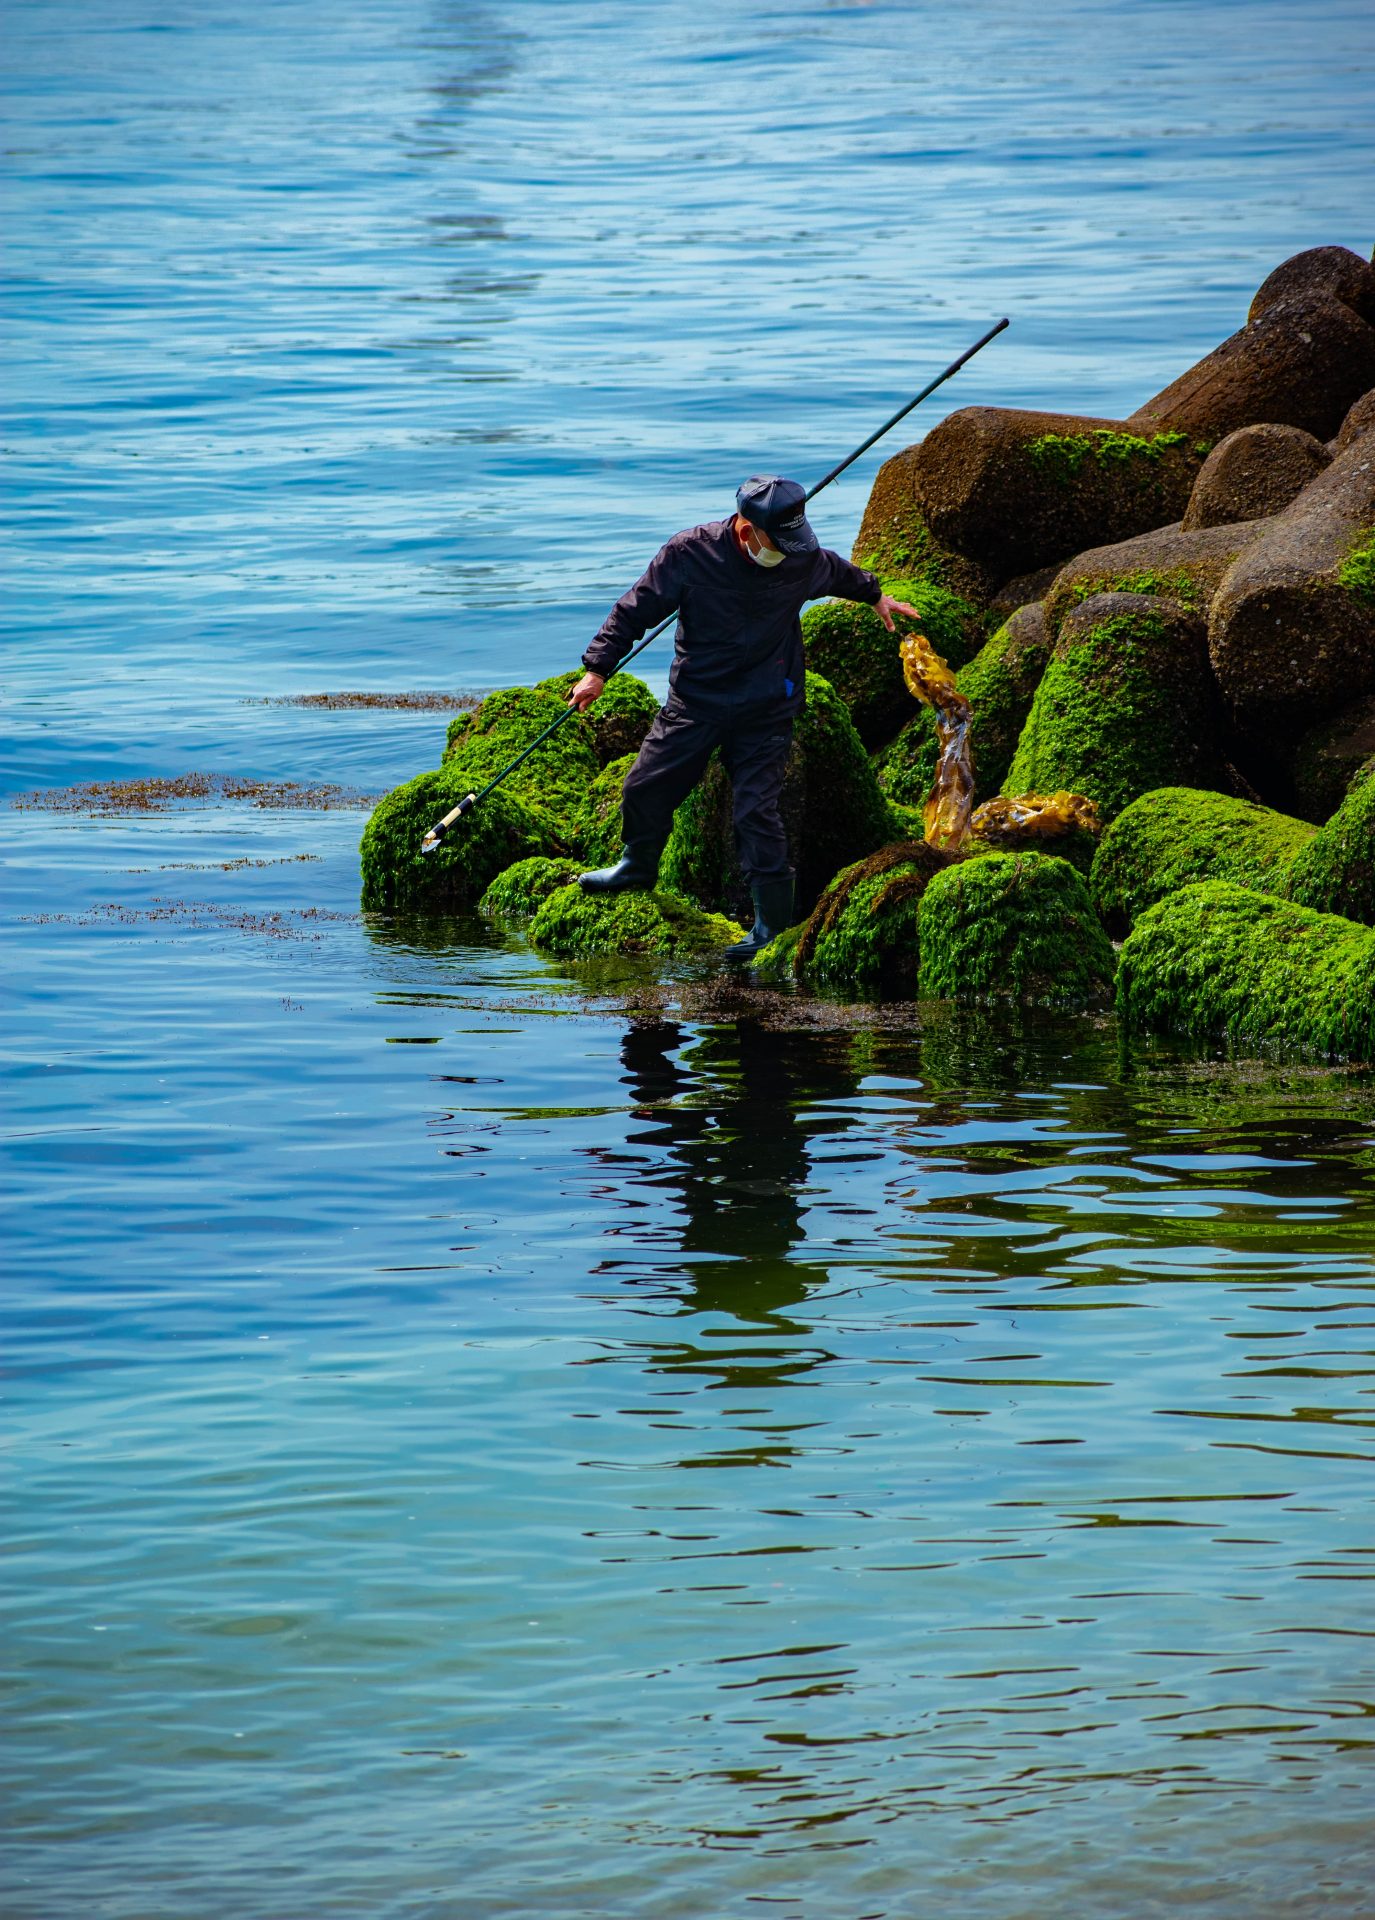 A man gathering seaweed while standing on the wavebreakers